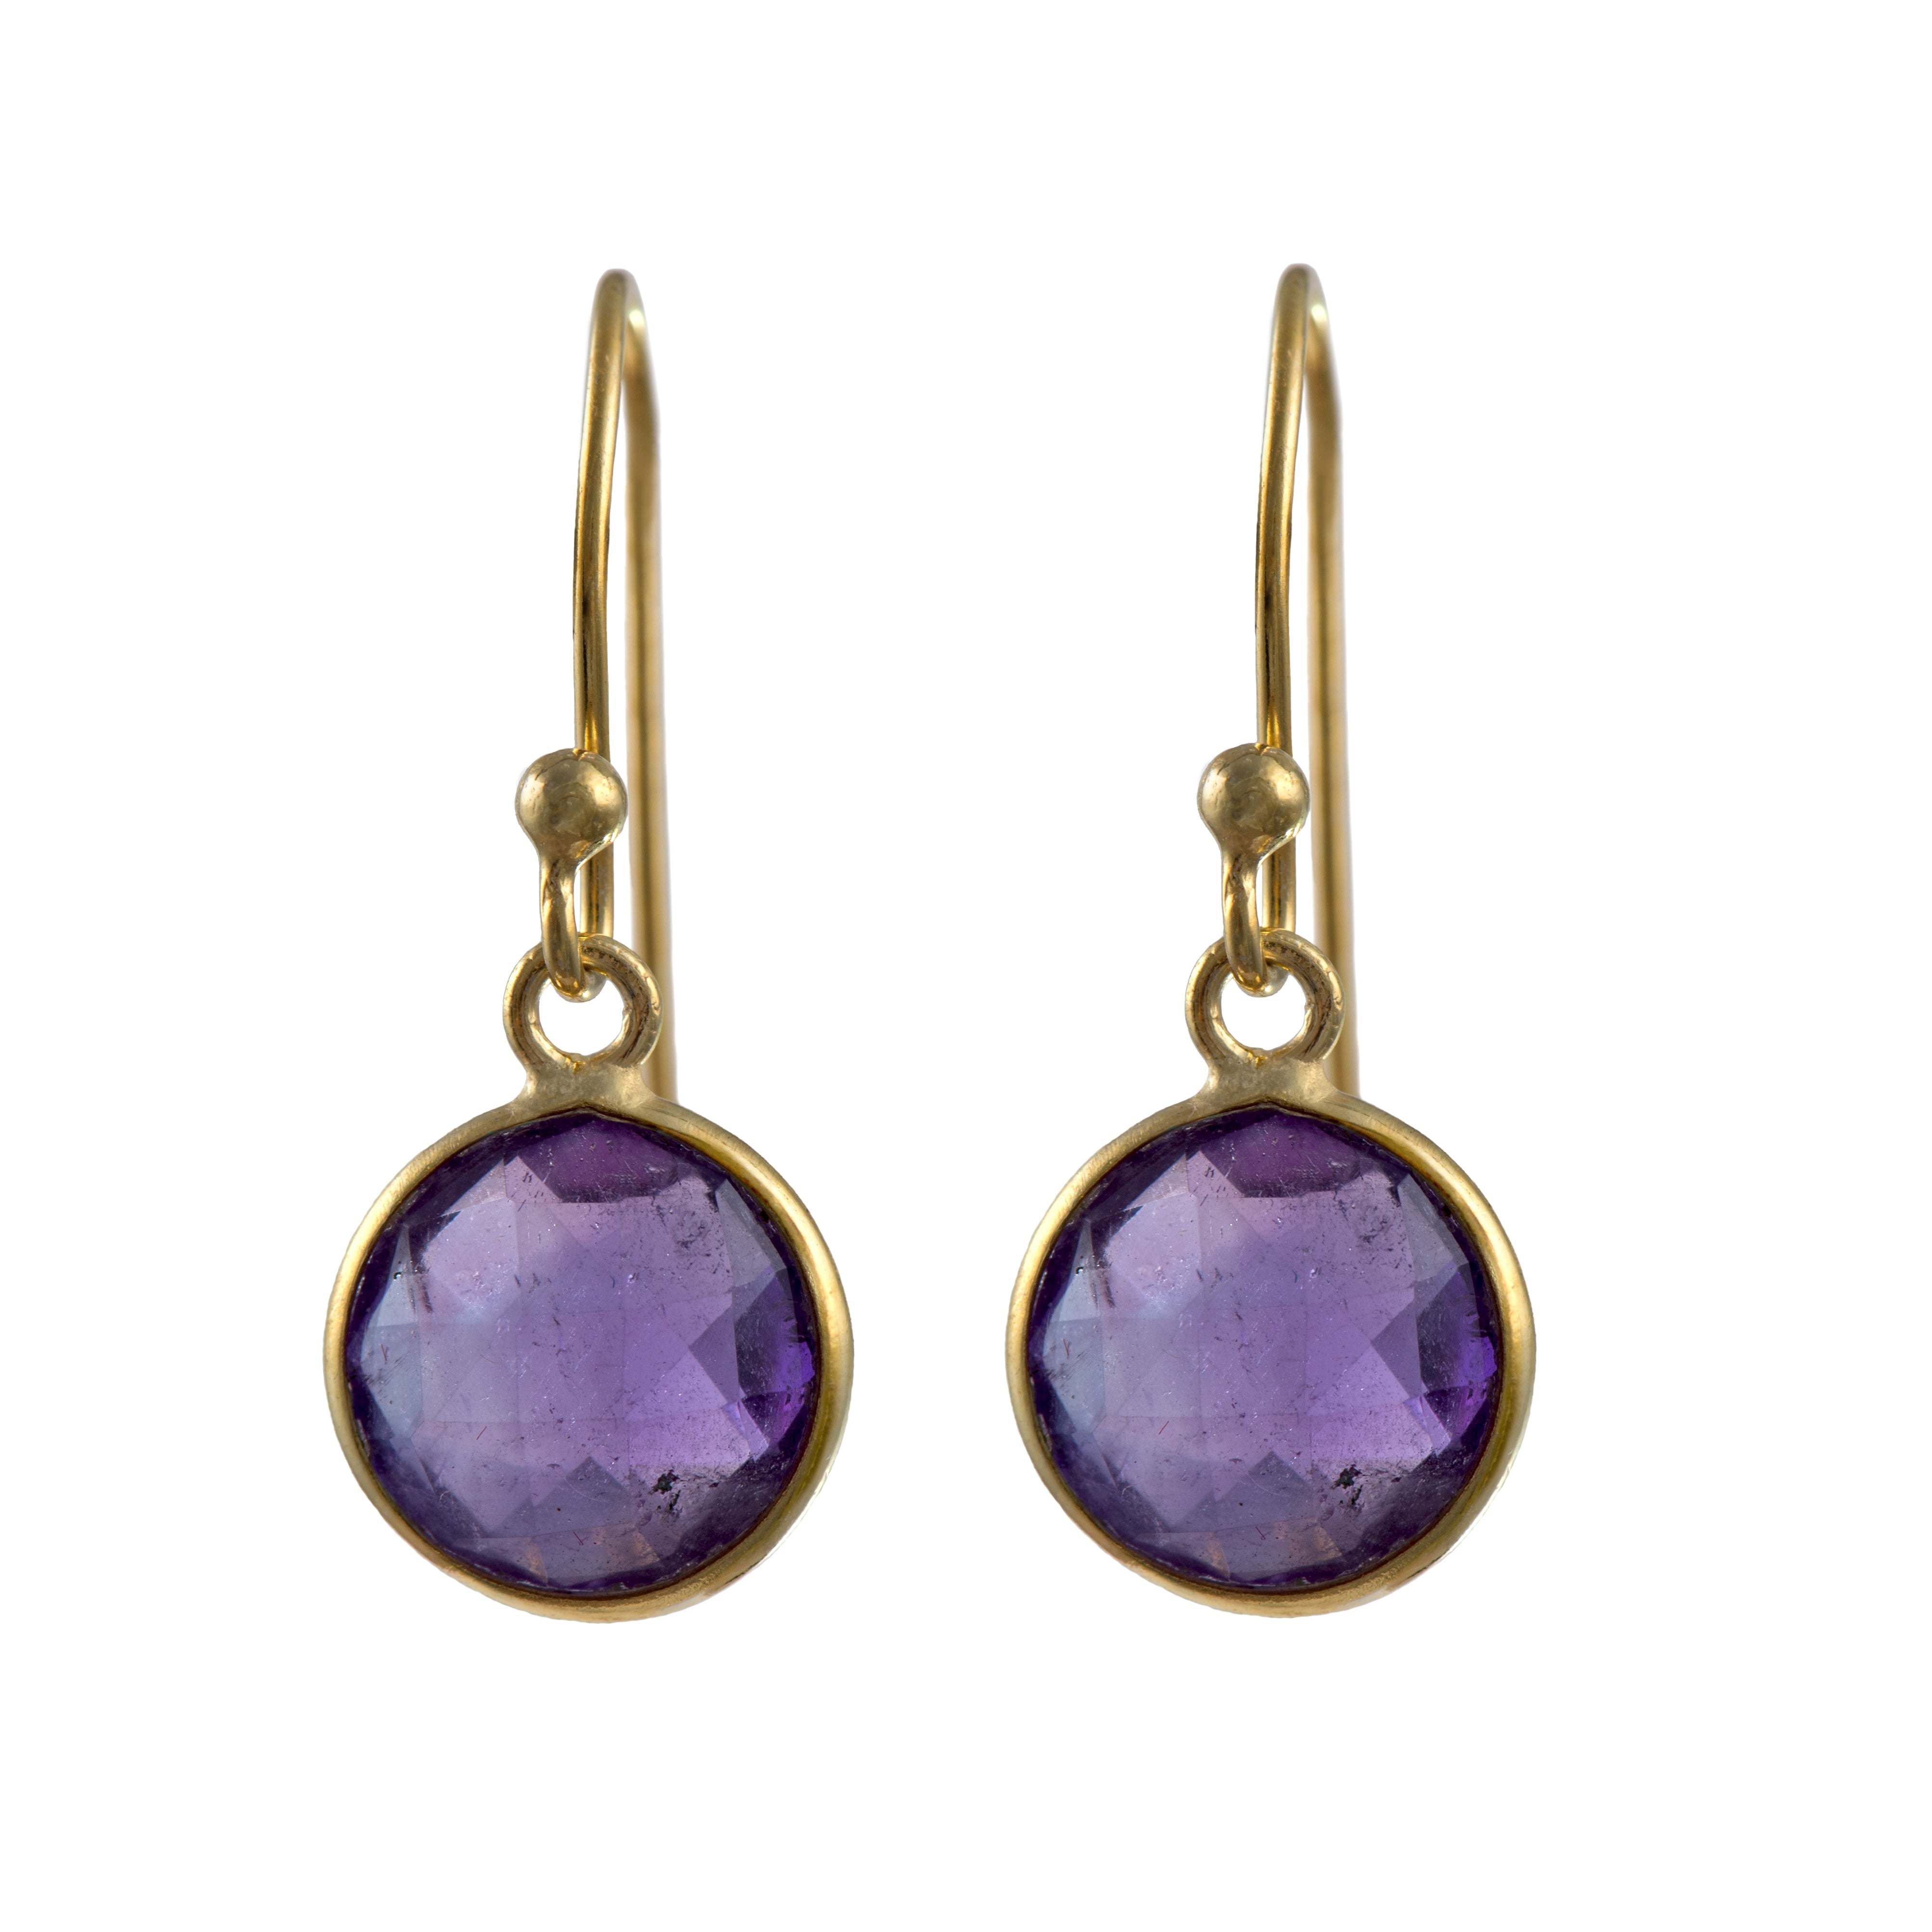 Amethyst Gold Plated Sterling Silver Earrings with a Round Faceted Gemstone Drop